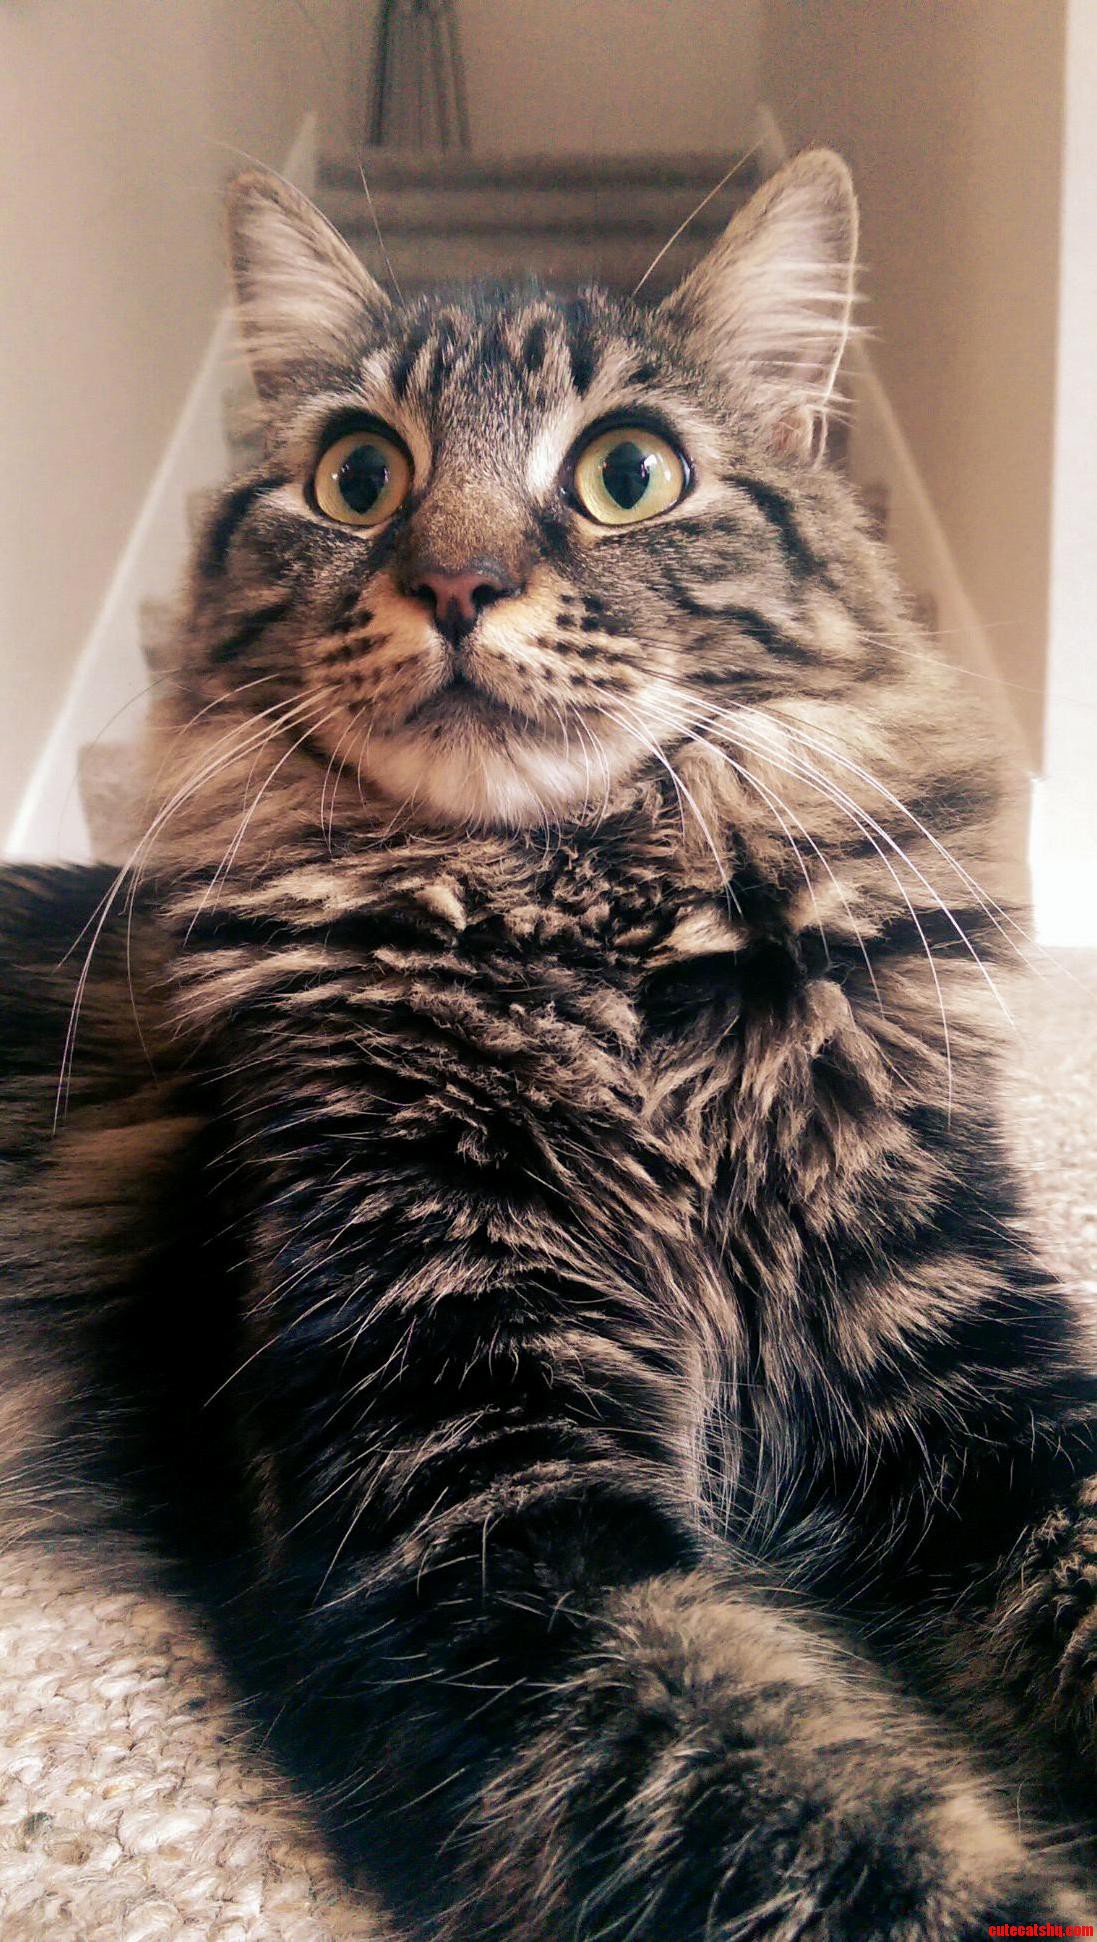 My Cooper is a most beautiful and regal kitty master.